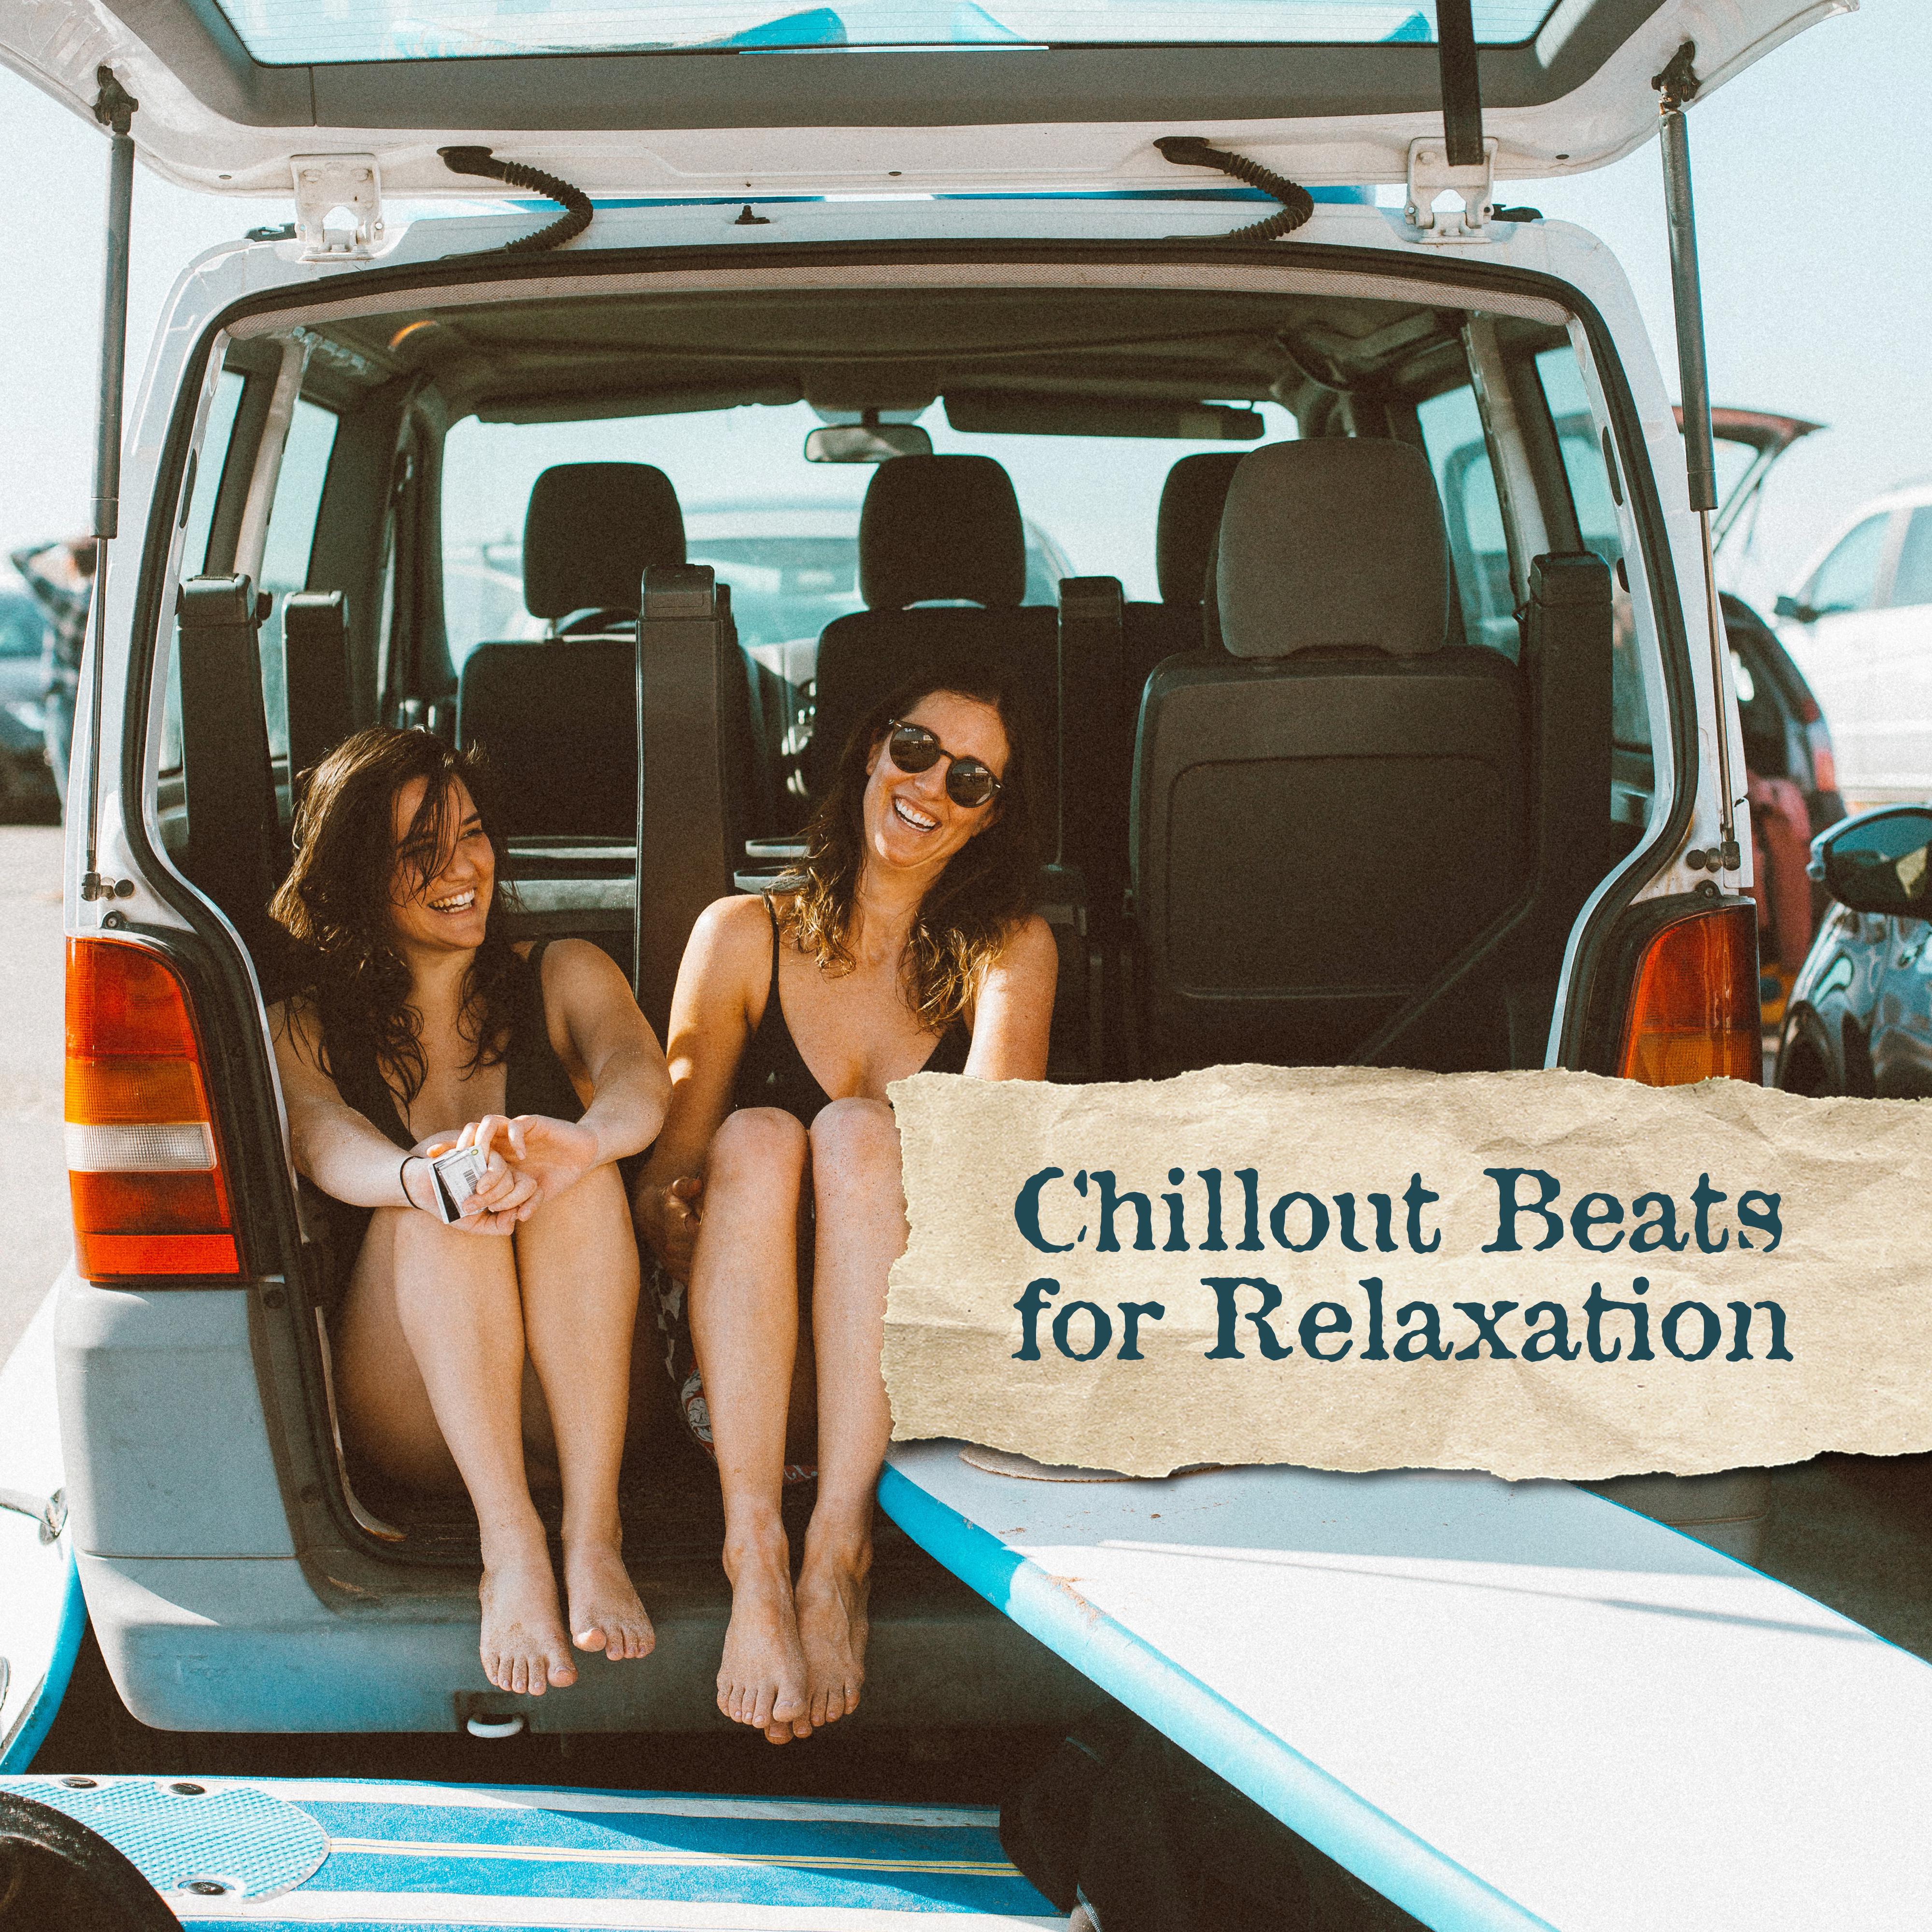 Chillout Beats for Relaxation: Summer Mix, Tropical Chill Out, 15 Summer Tunes to Rest, Lounge Music, Ibiza Chill Out